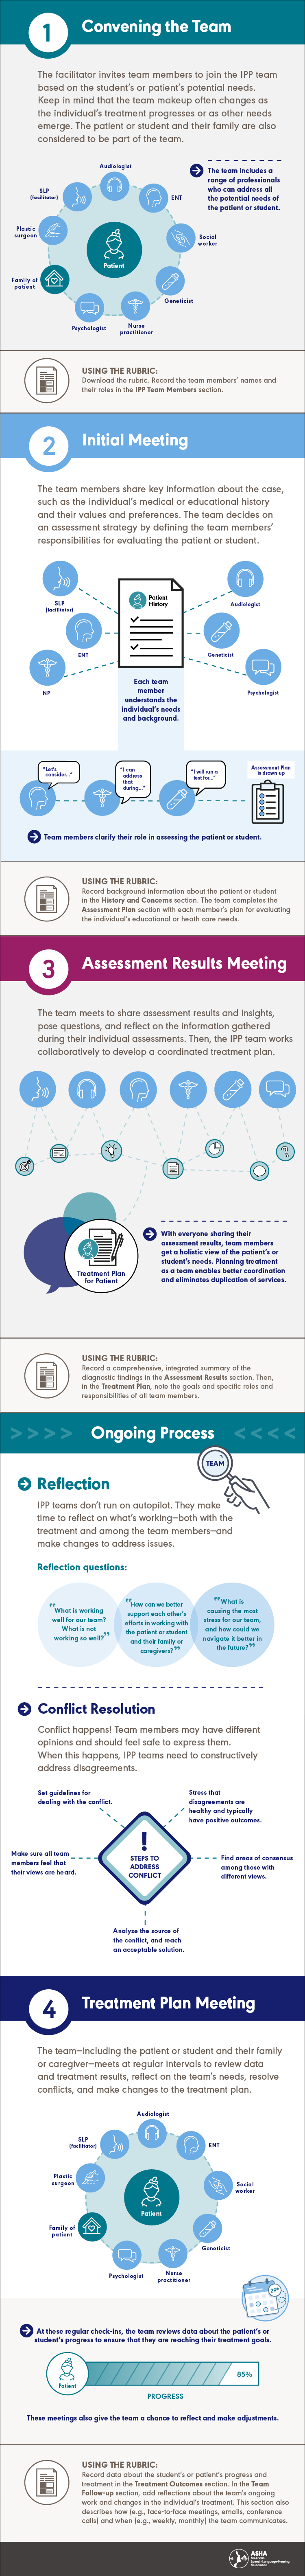 How to set up and run an IPP team at your workplace infographic